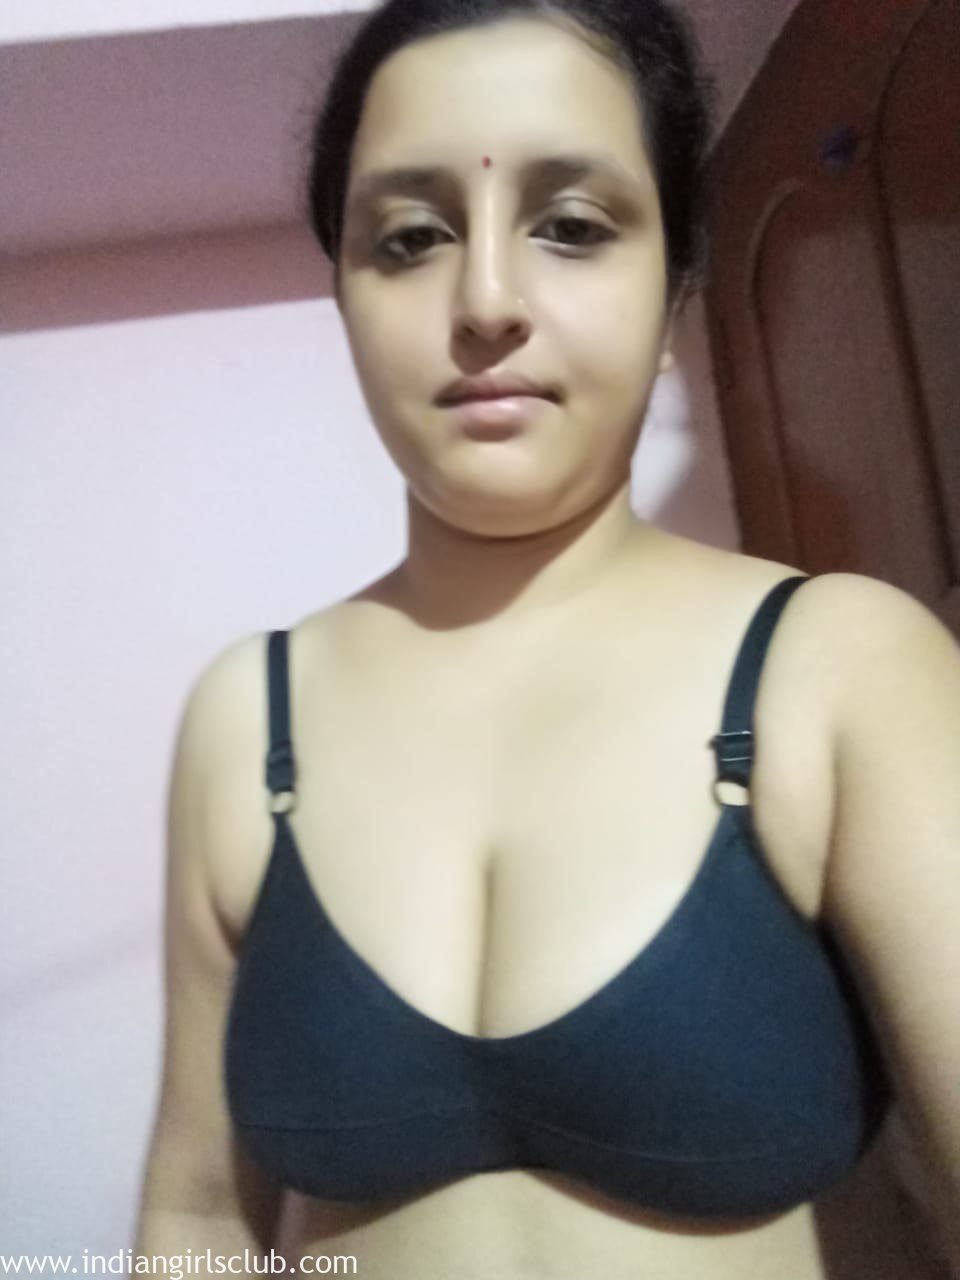 big-tits-bengali-indian-housewife-ready-for-hot-sex-12 - Indian Girls Club  picture